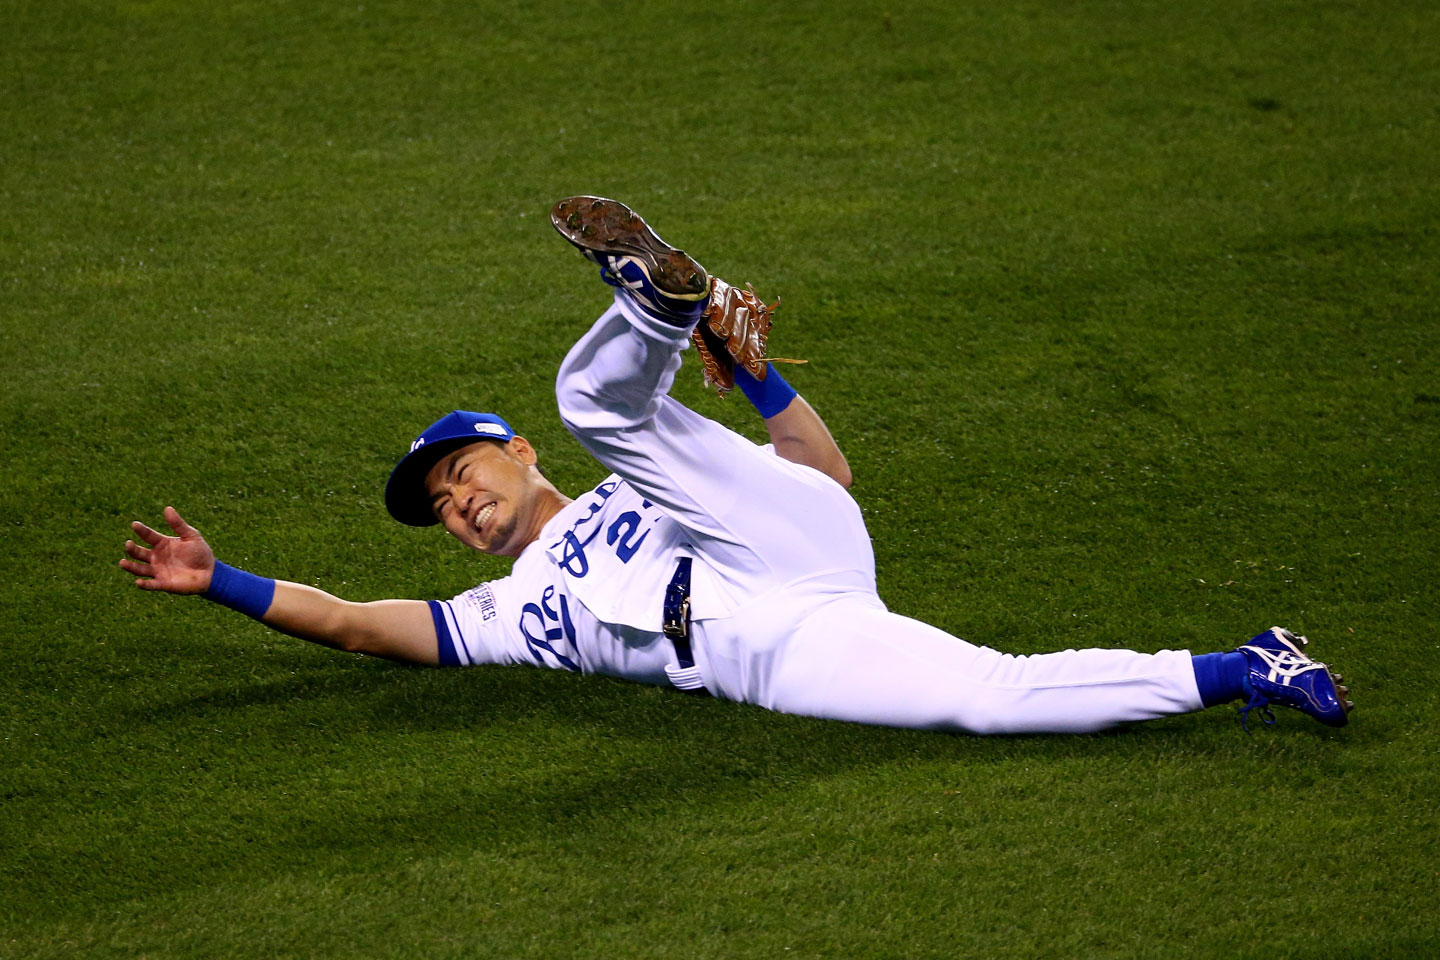 Royals right fielder Nori Aoki sprawls helplessly after misplaying a blistering one-hop drive in the gap by the Giants' Joe Panik. Gregor Blanco scored on the play. Panik wound up on third with a triple and later scored on Pablo Sandoval's single. Giants 7, Royals 0. (Elsa/Getty Images)